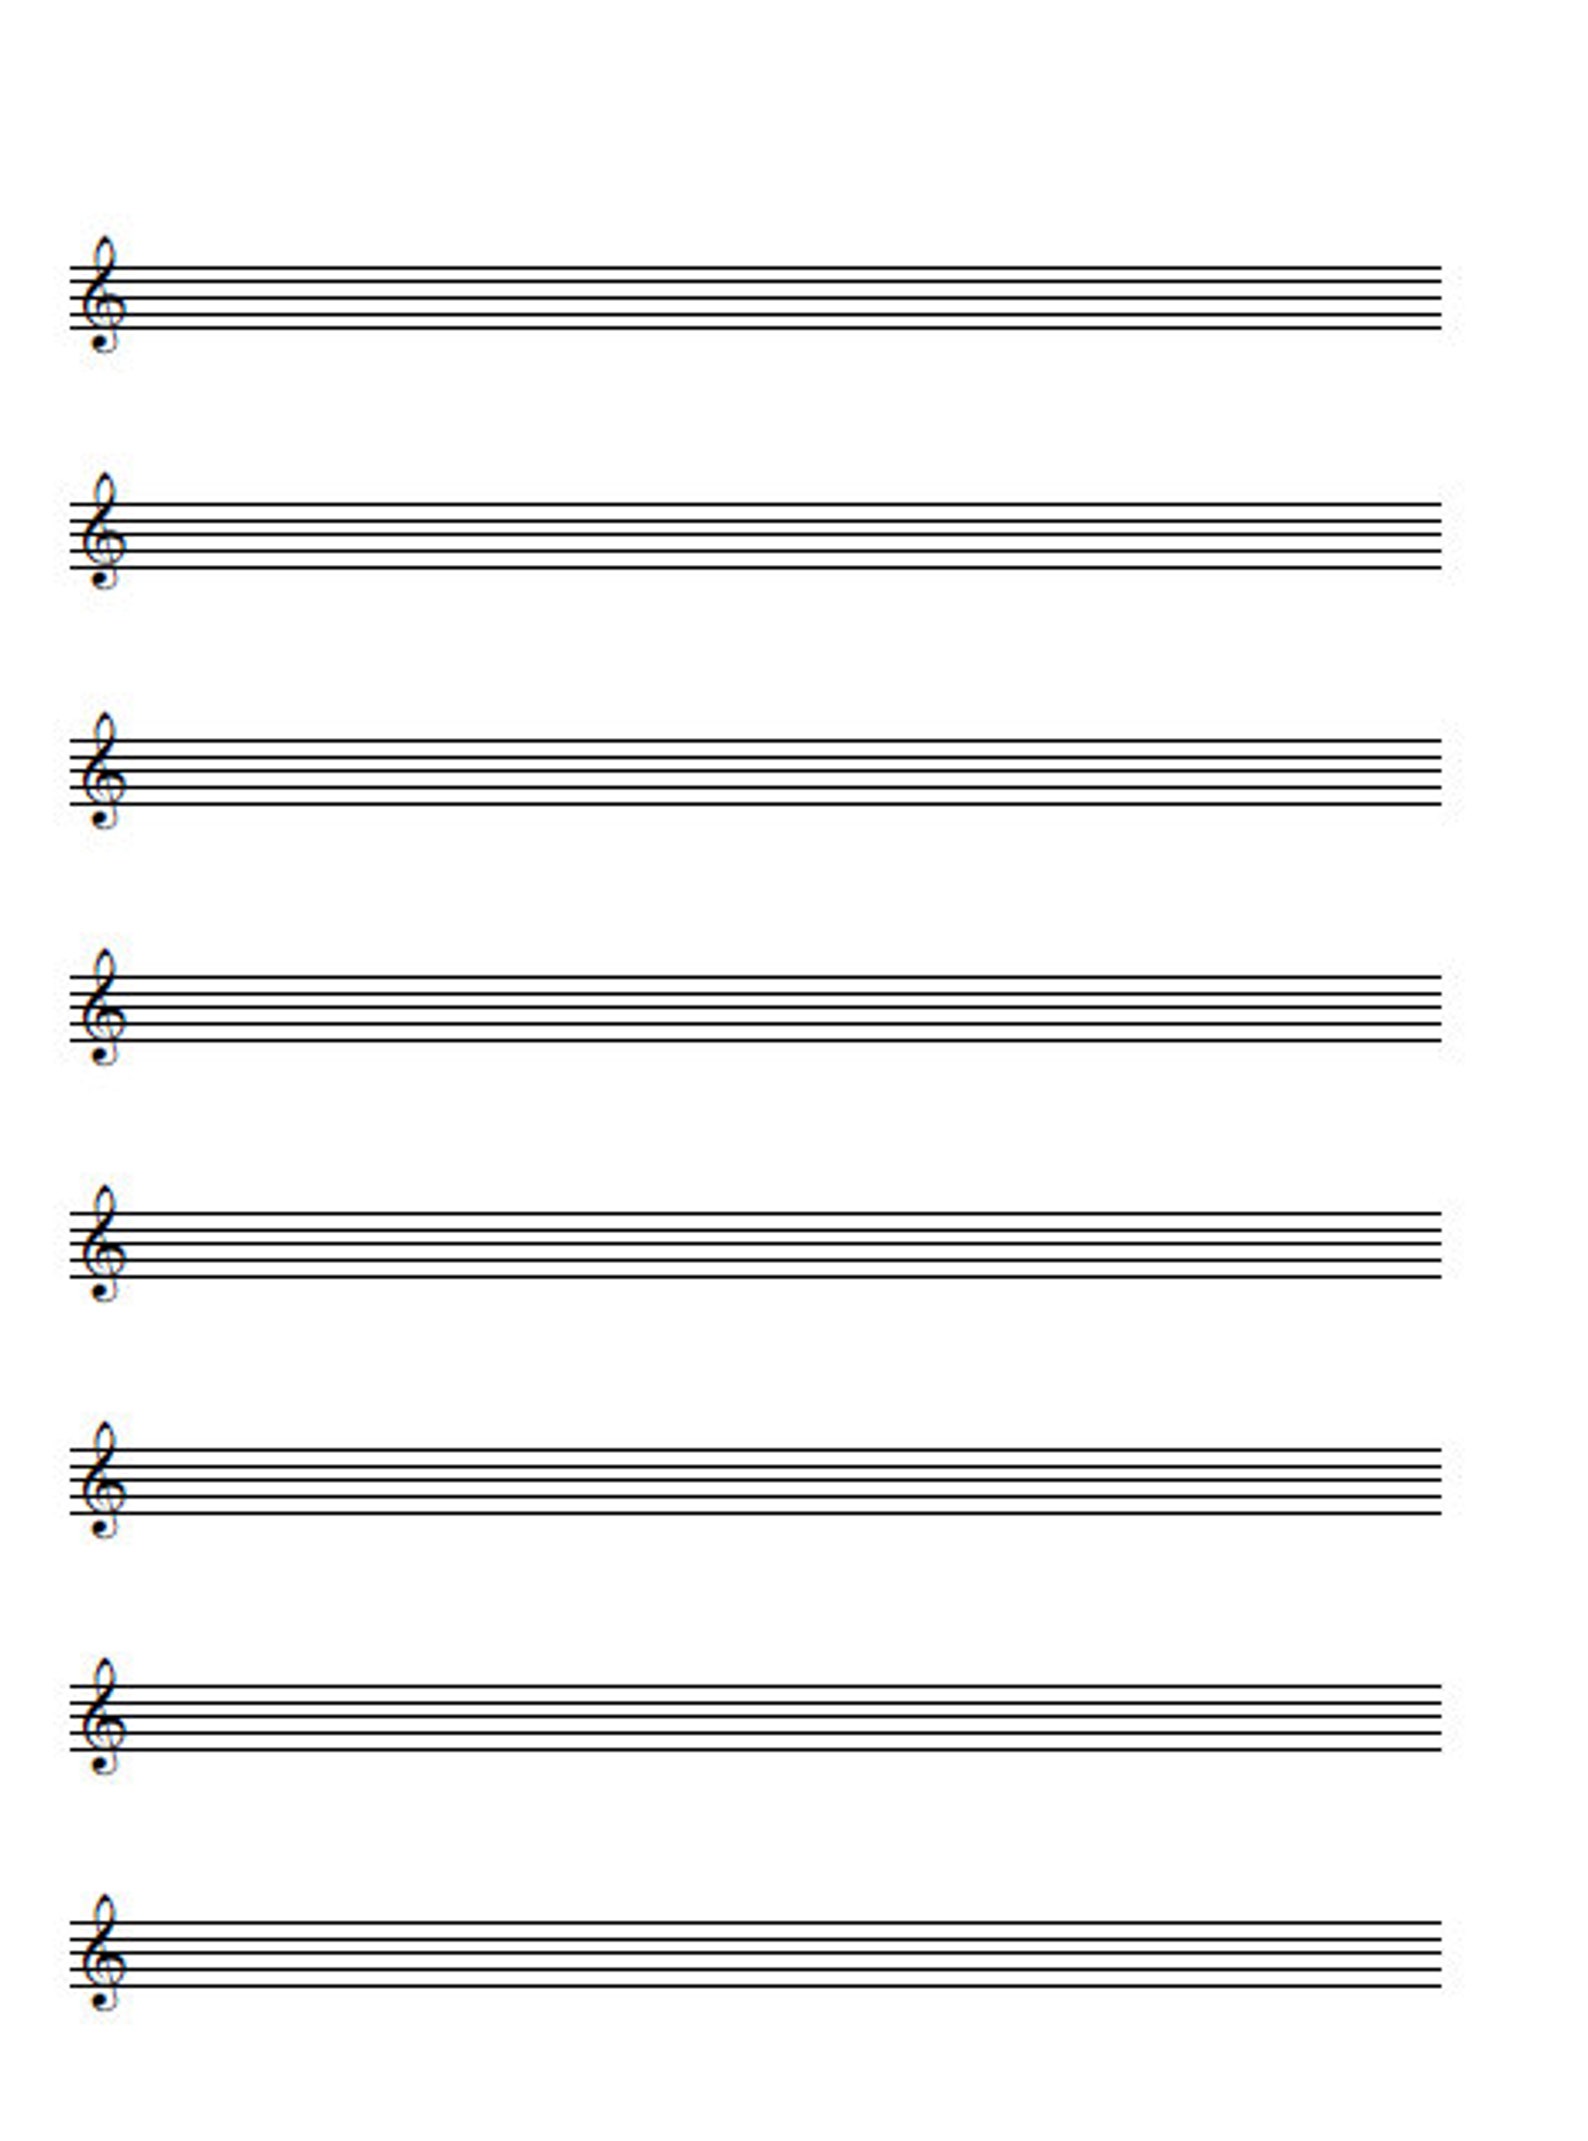 a4-music-blank-sheet-treble-clef-8-and-12-staves-printable-etsy